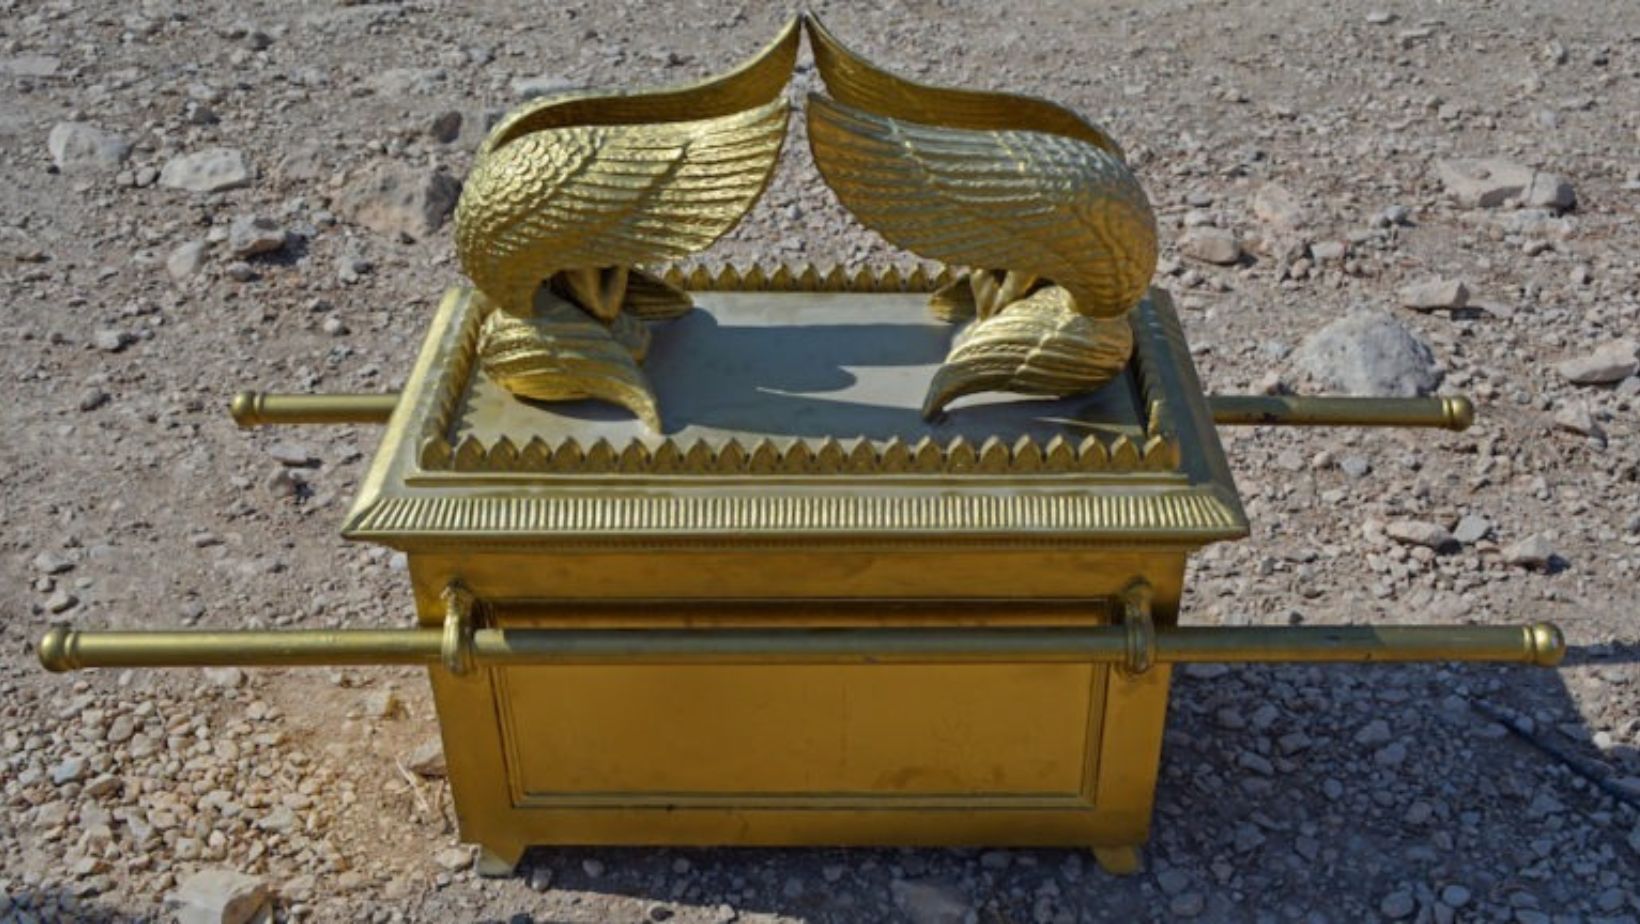 Ark of the Covenant Discovery